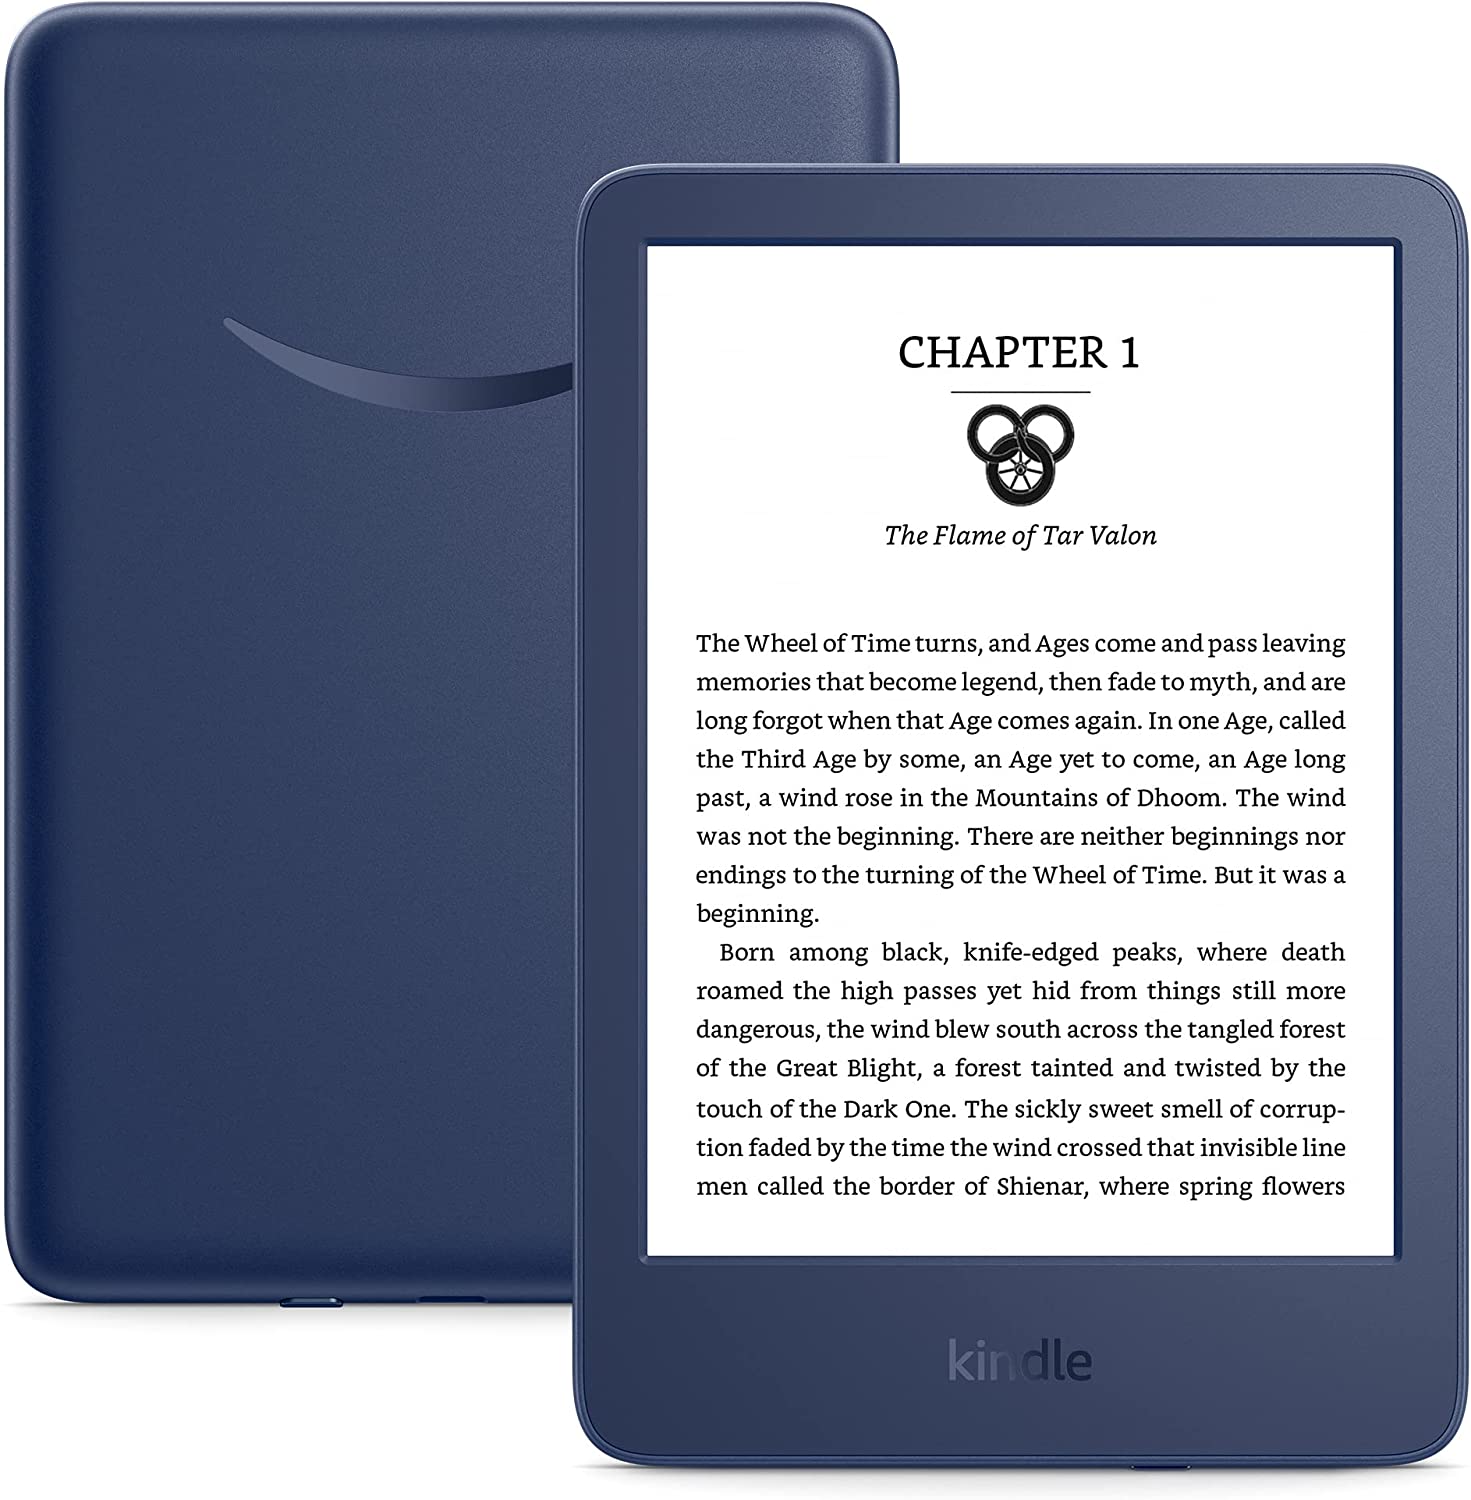 All-new Amazon Kindle 11th Generation (2022) – The lightest and most compact Kindle, now with a 6” 300 ppi high-resolution display, and 2x the storage